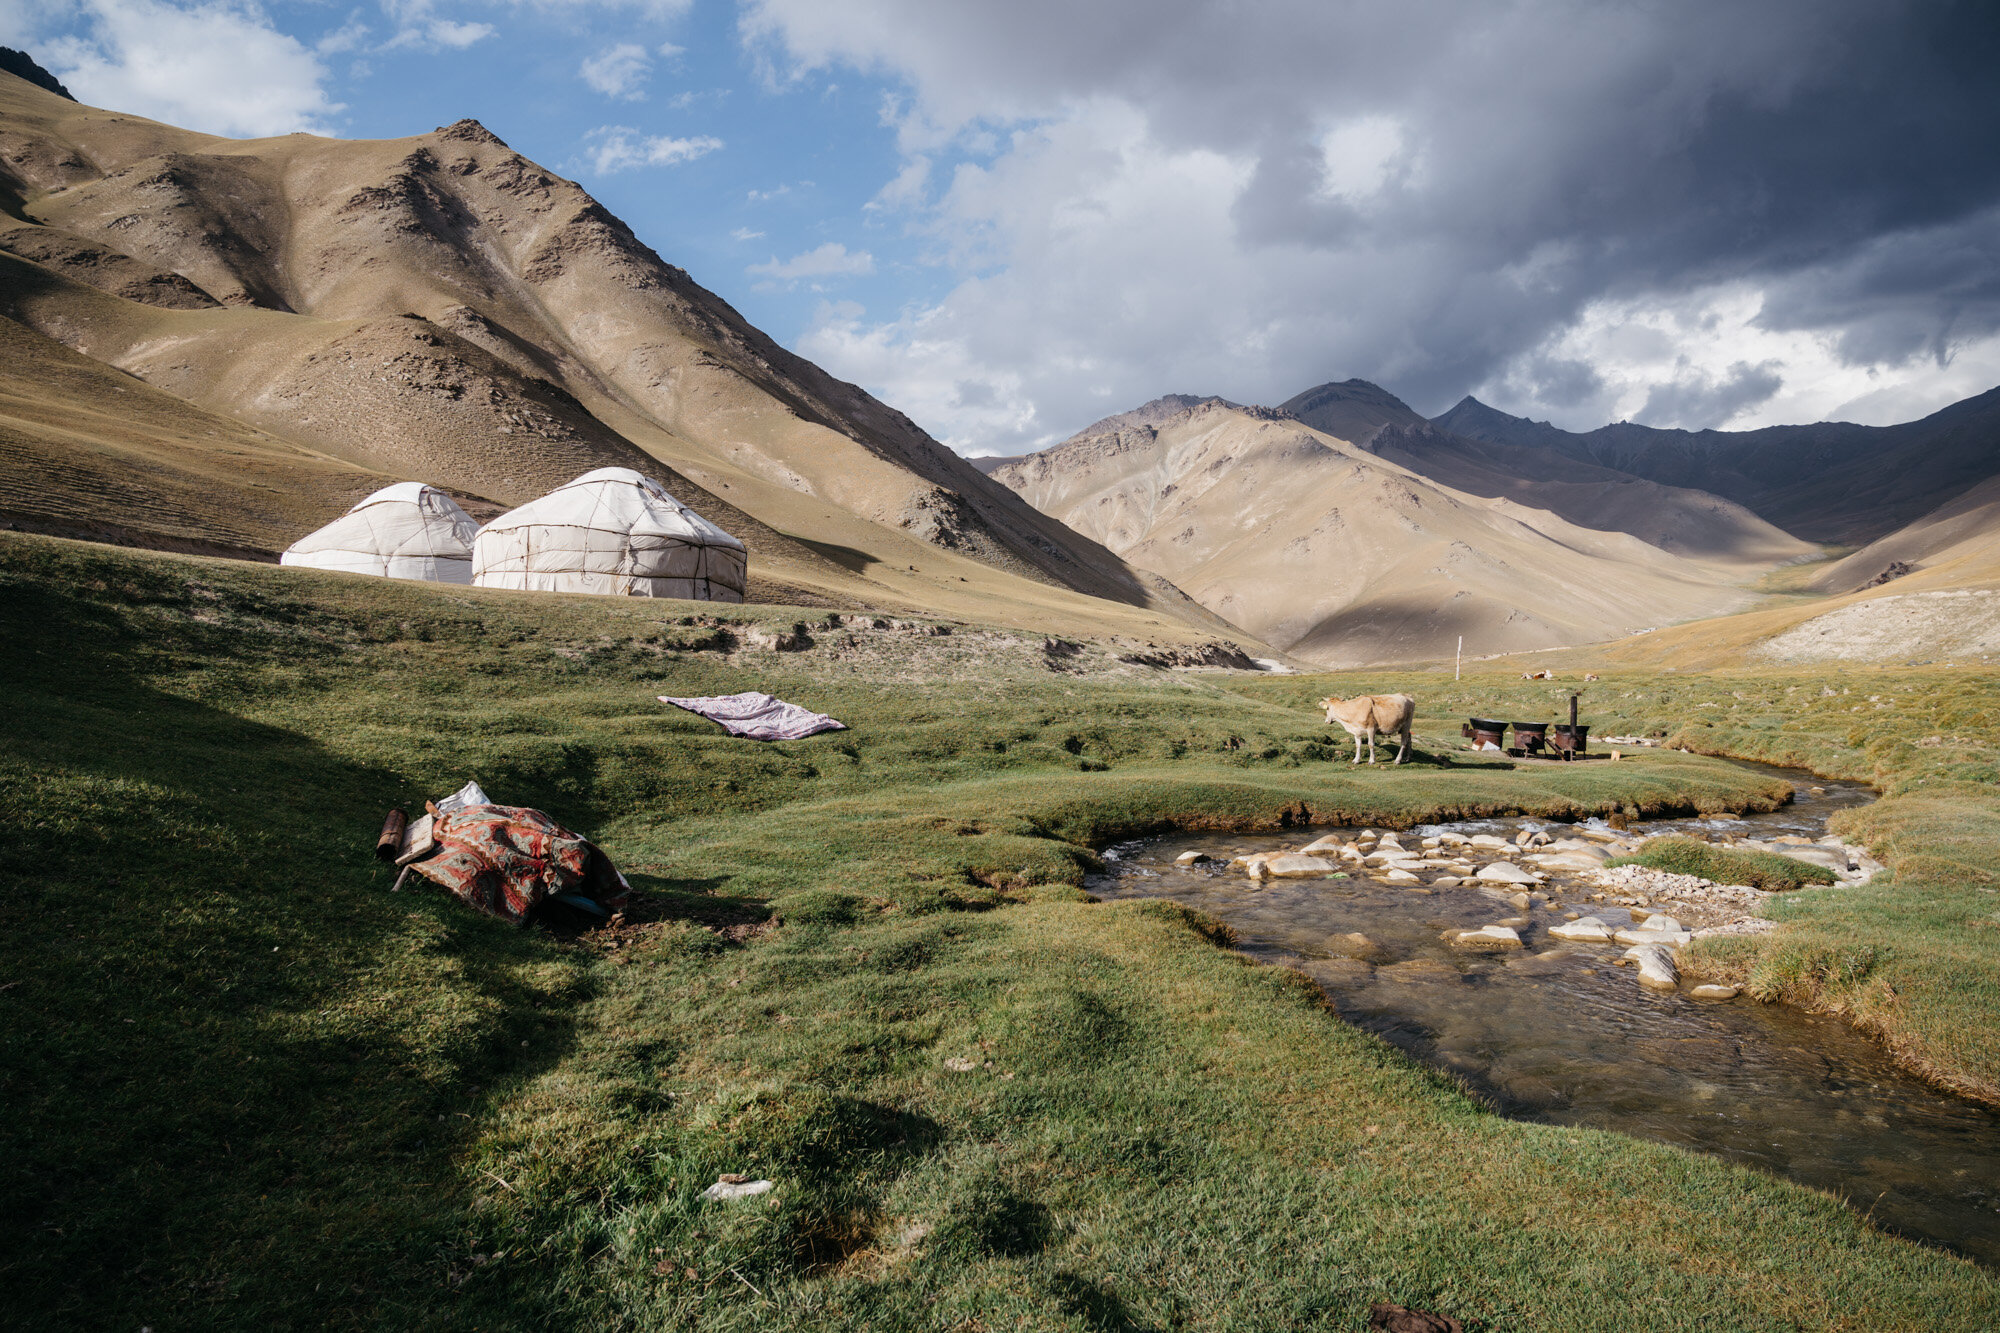  Some nearby yurts and cow by a stream 